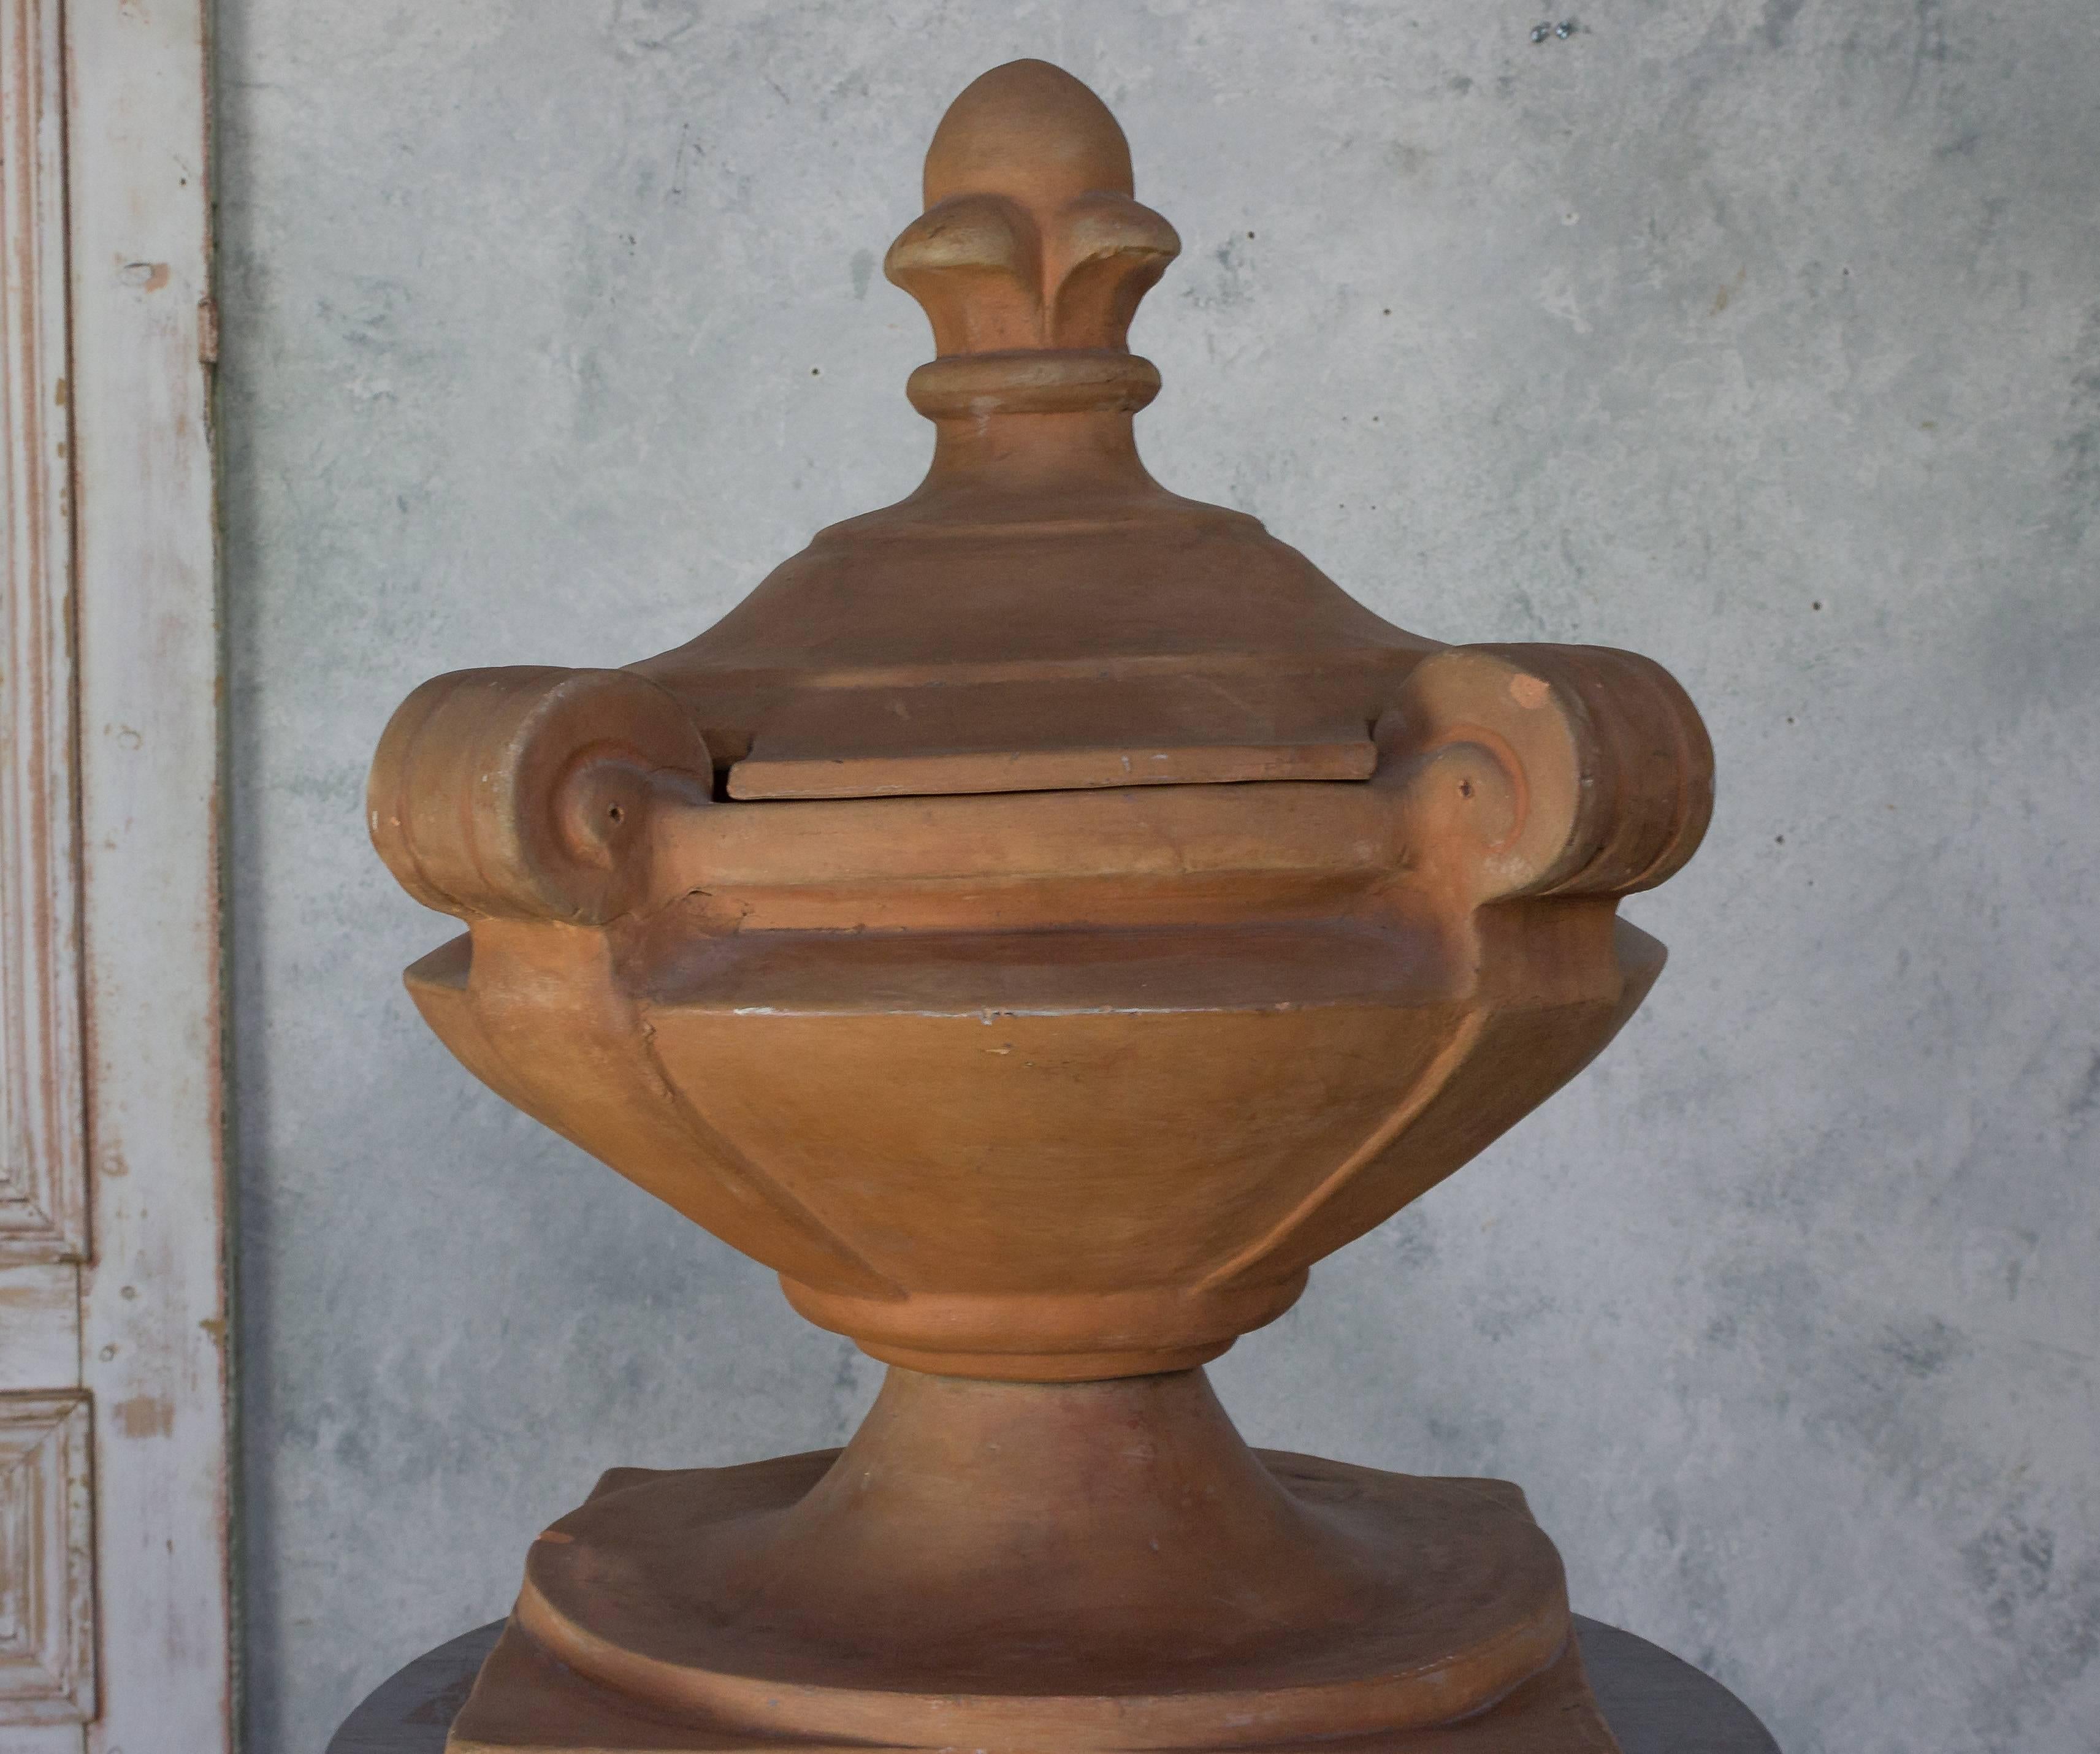 Neoclassical Decorative French 1920s Covered Terracotta Urn